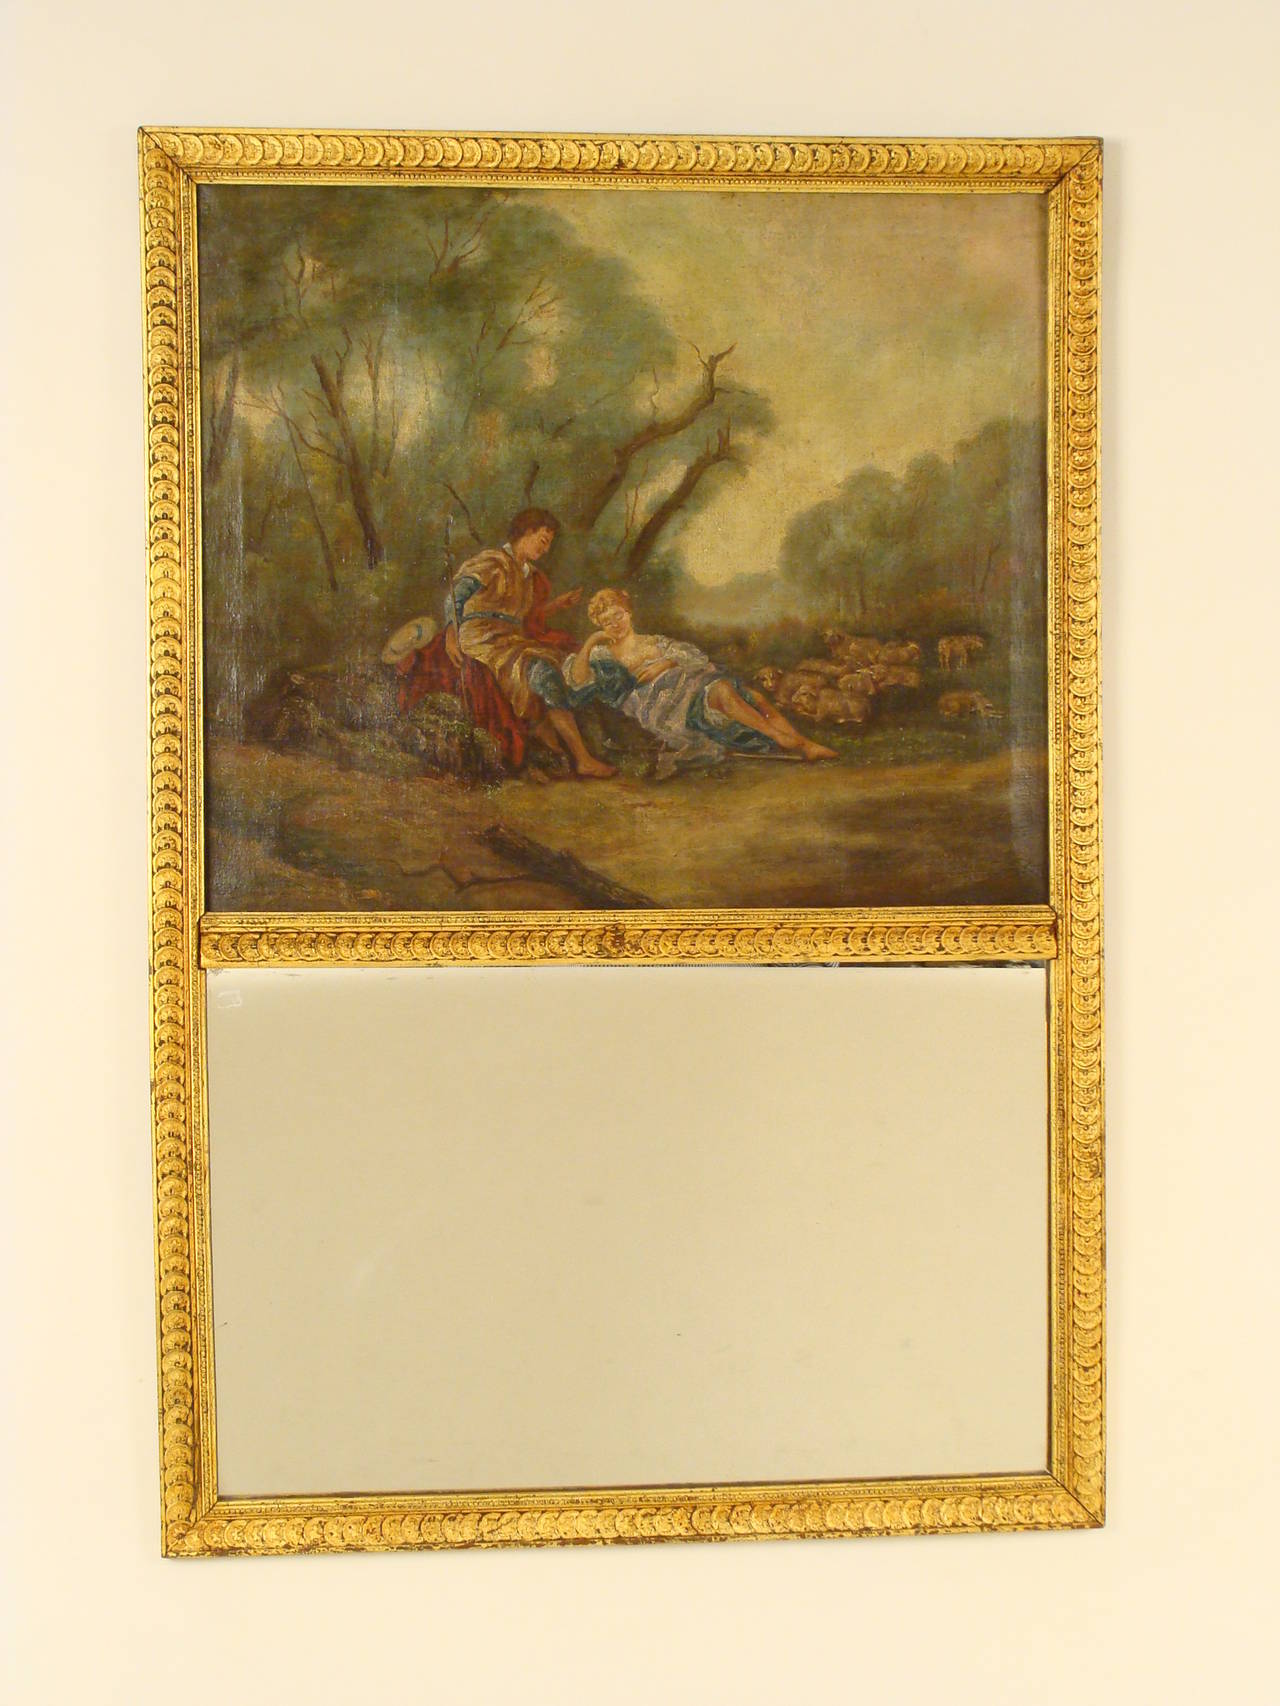 Louis XVI style gilt decorated trumeau mirror, 19th century. The painting is signed in the lower left hand corner. The painting is likely older than the mirror frame.